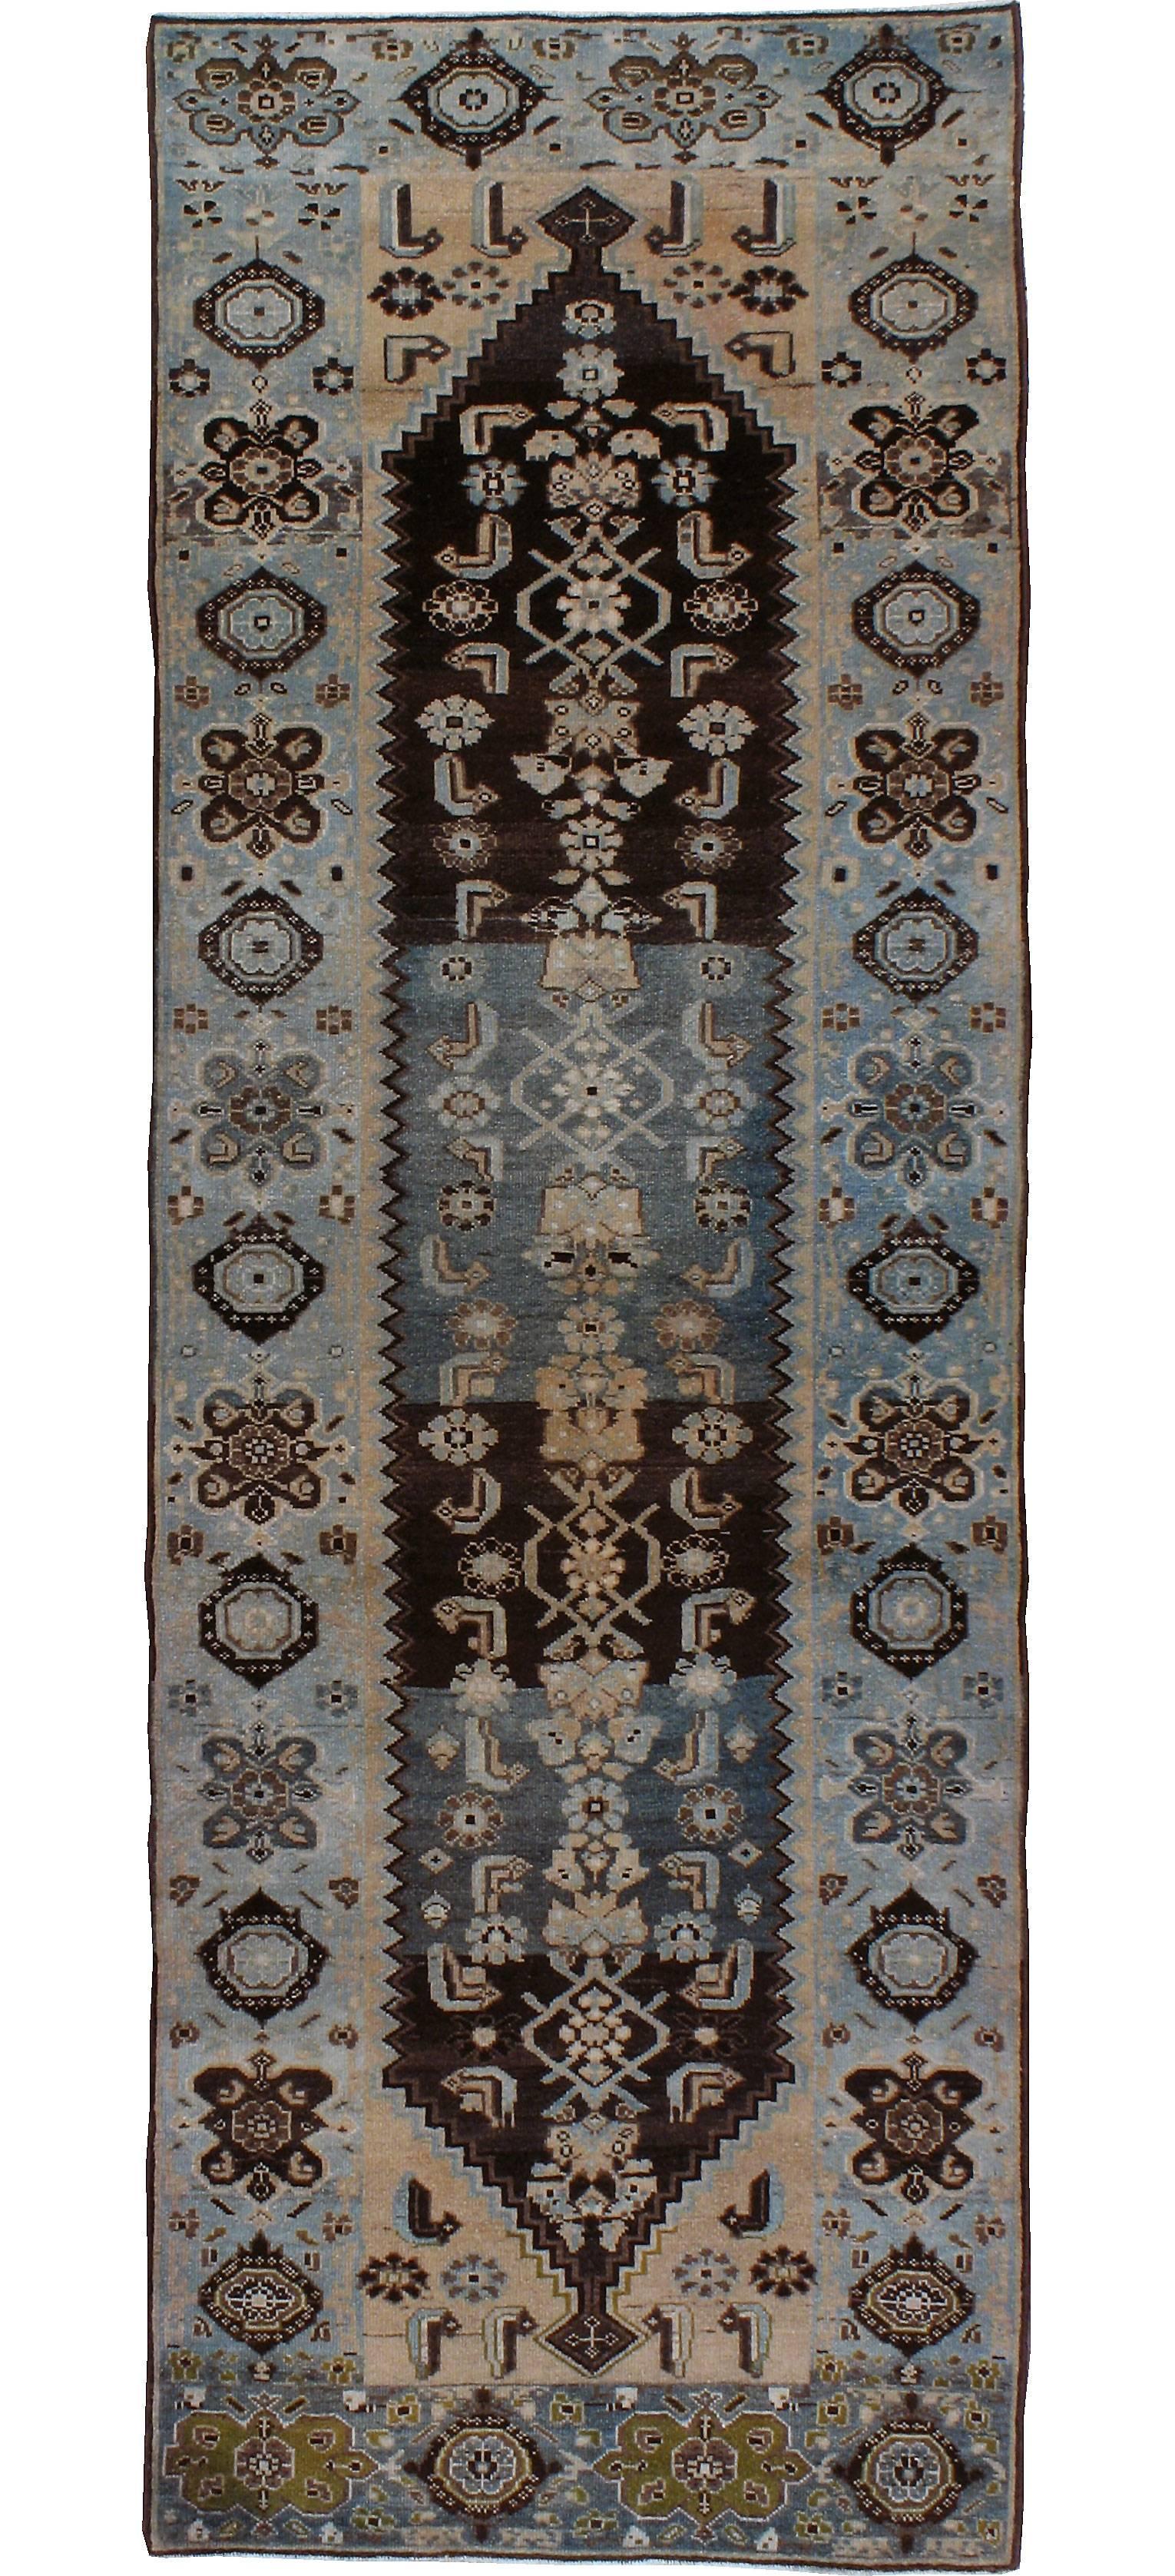 An antique Persian Malayer carpet from the first quarter of the 20th century. Malayer is one of over 100 weaving villages outside of Hamadan in Northwestern Iran. The patterns of Malayer rugs are primarily geometric and one Classic pattern ‘boteh’